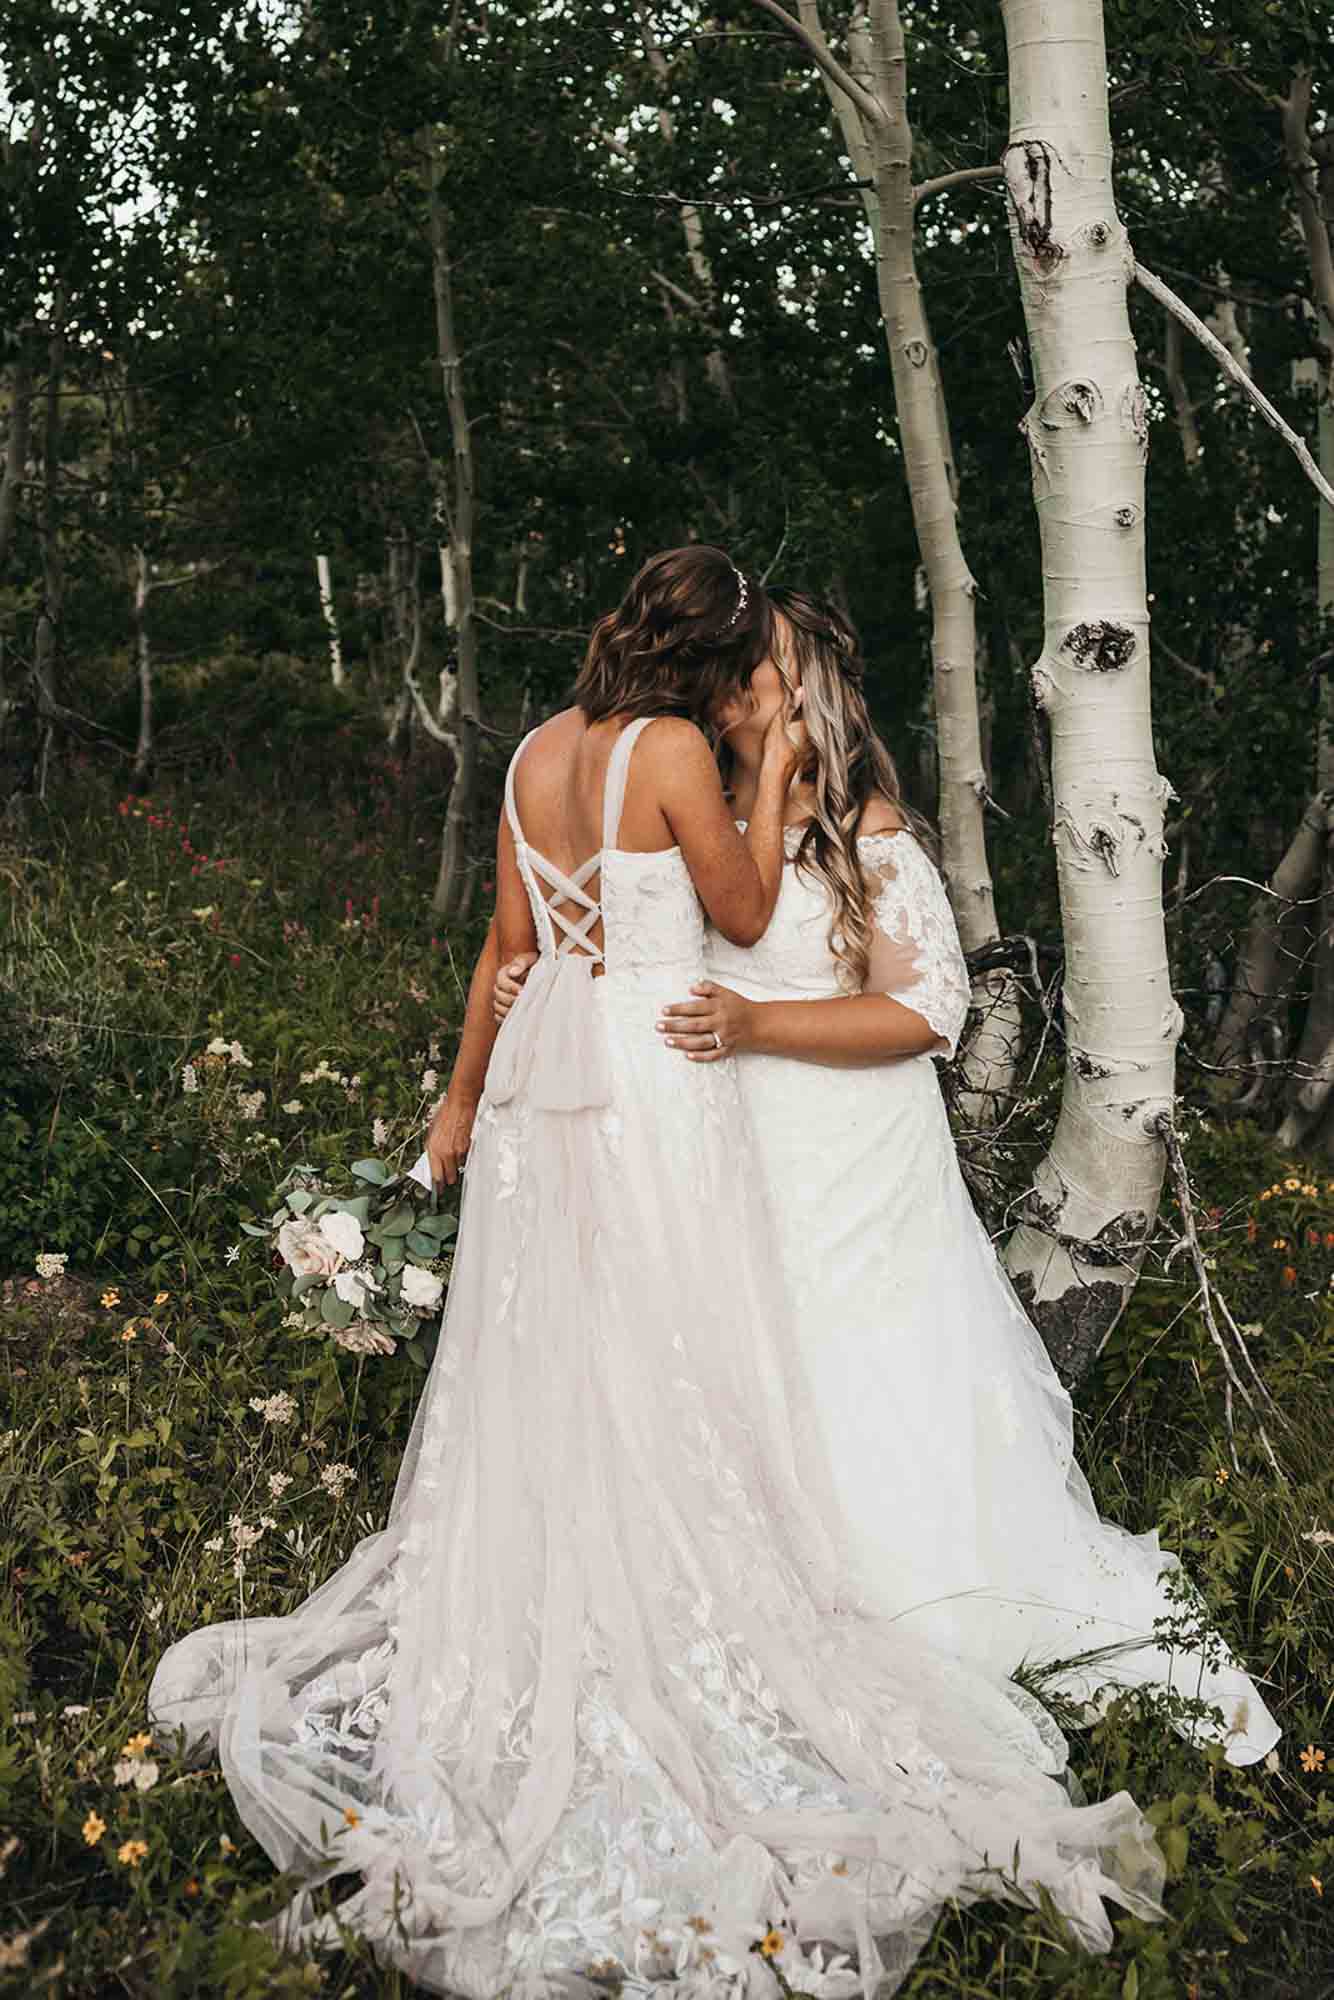 Autumn wedding in the Utah mountains | Terra Ong Photography | Featured on Equally Wed, the leading LGBTQ+ wedding magazine